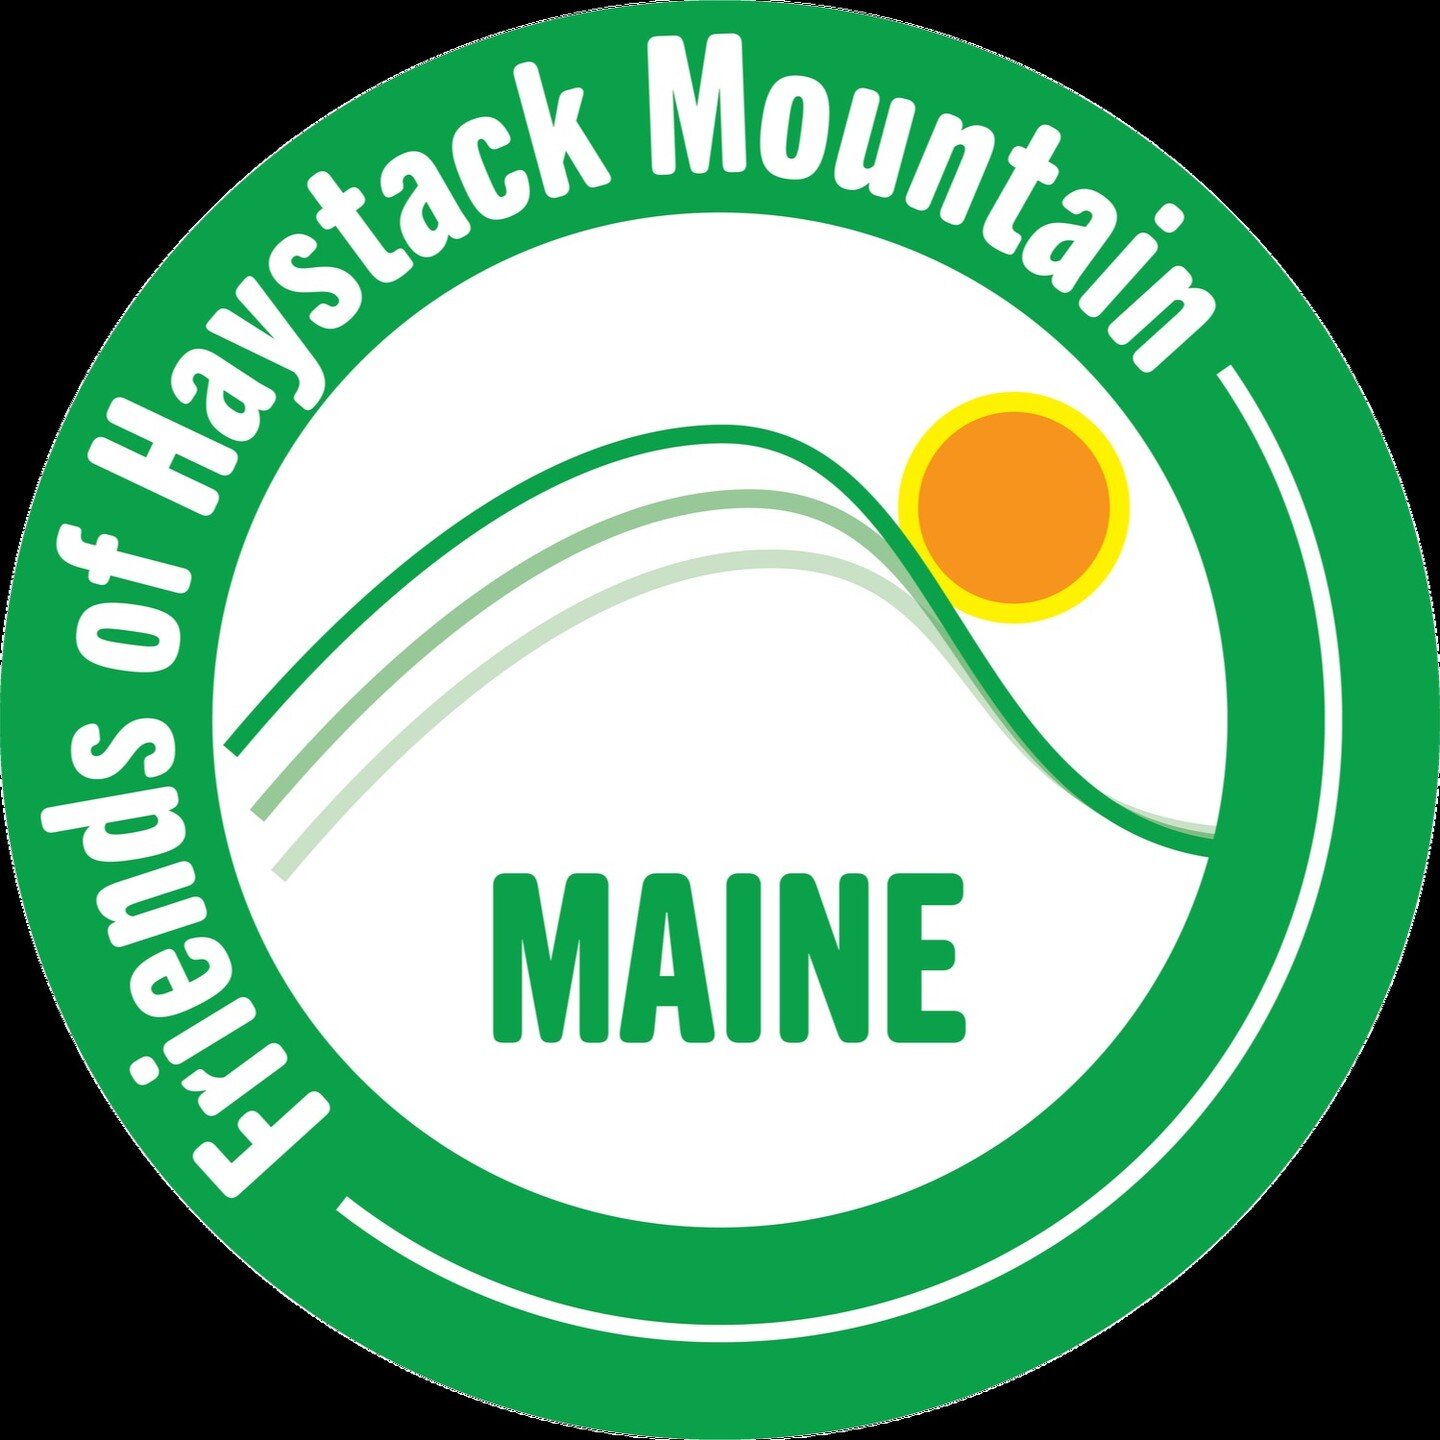 Great story from @newscentermaine on our efforts to #savehaystackmountain. 

Check it out: https://www.newscentermaine.com/article/sports/outdoors/a-grassroots-group-is-raising-money-to-preserve-haystack-mountain-fundraising-outdoors-environment-comm